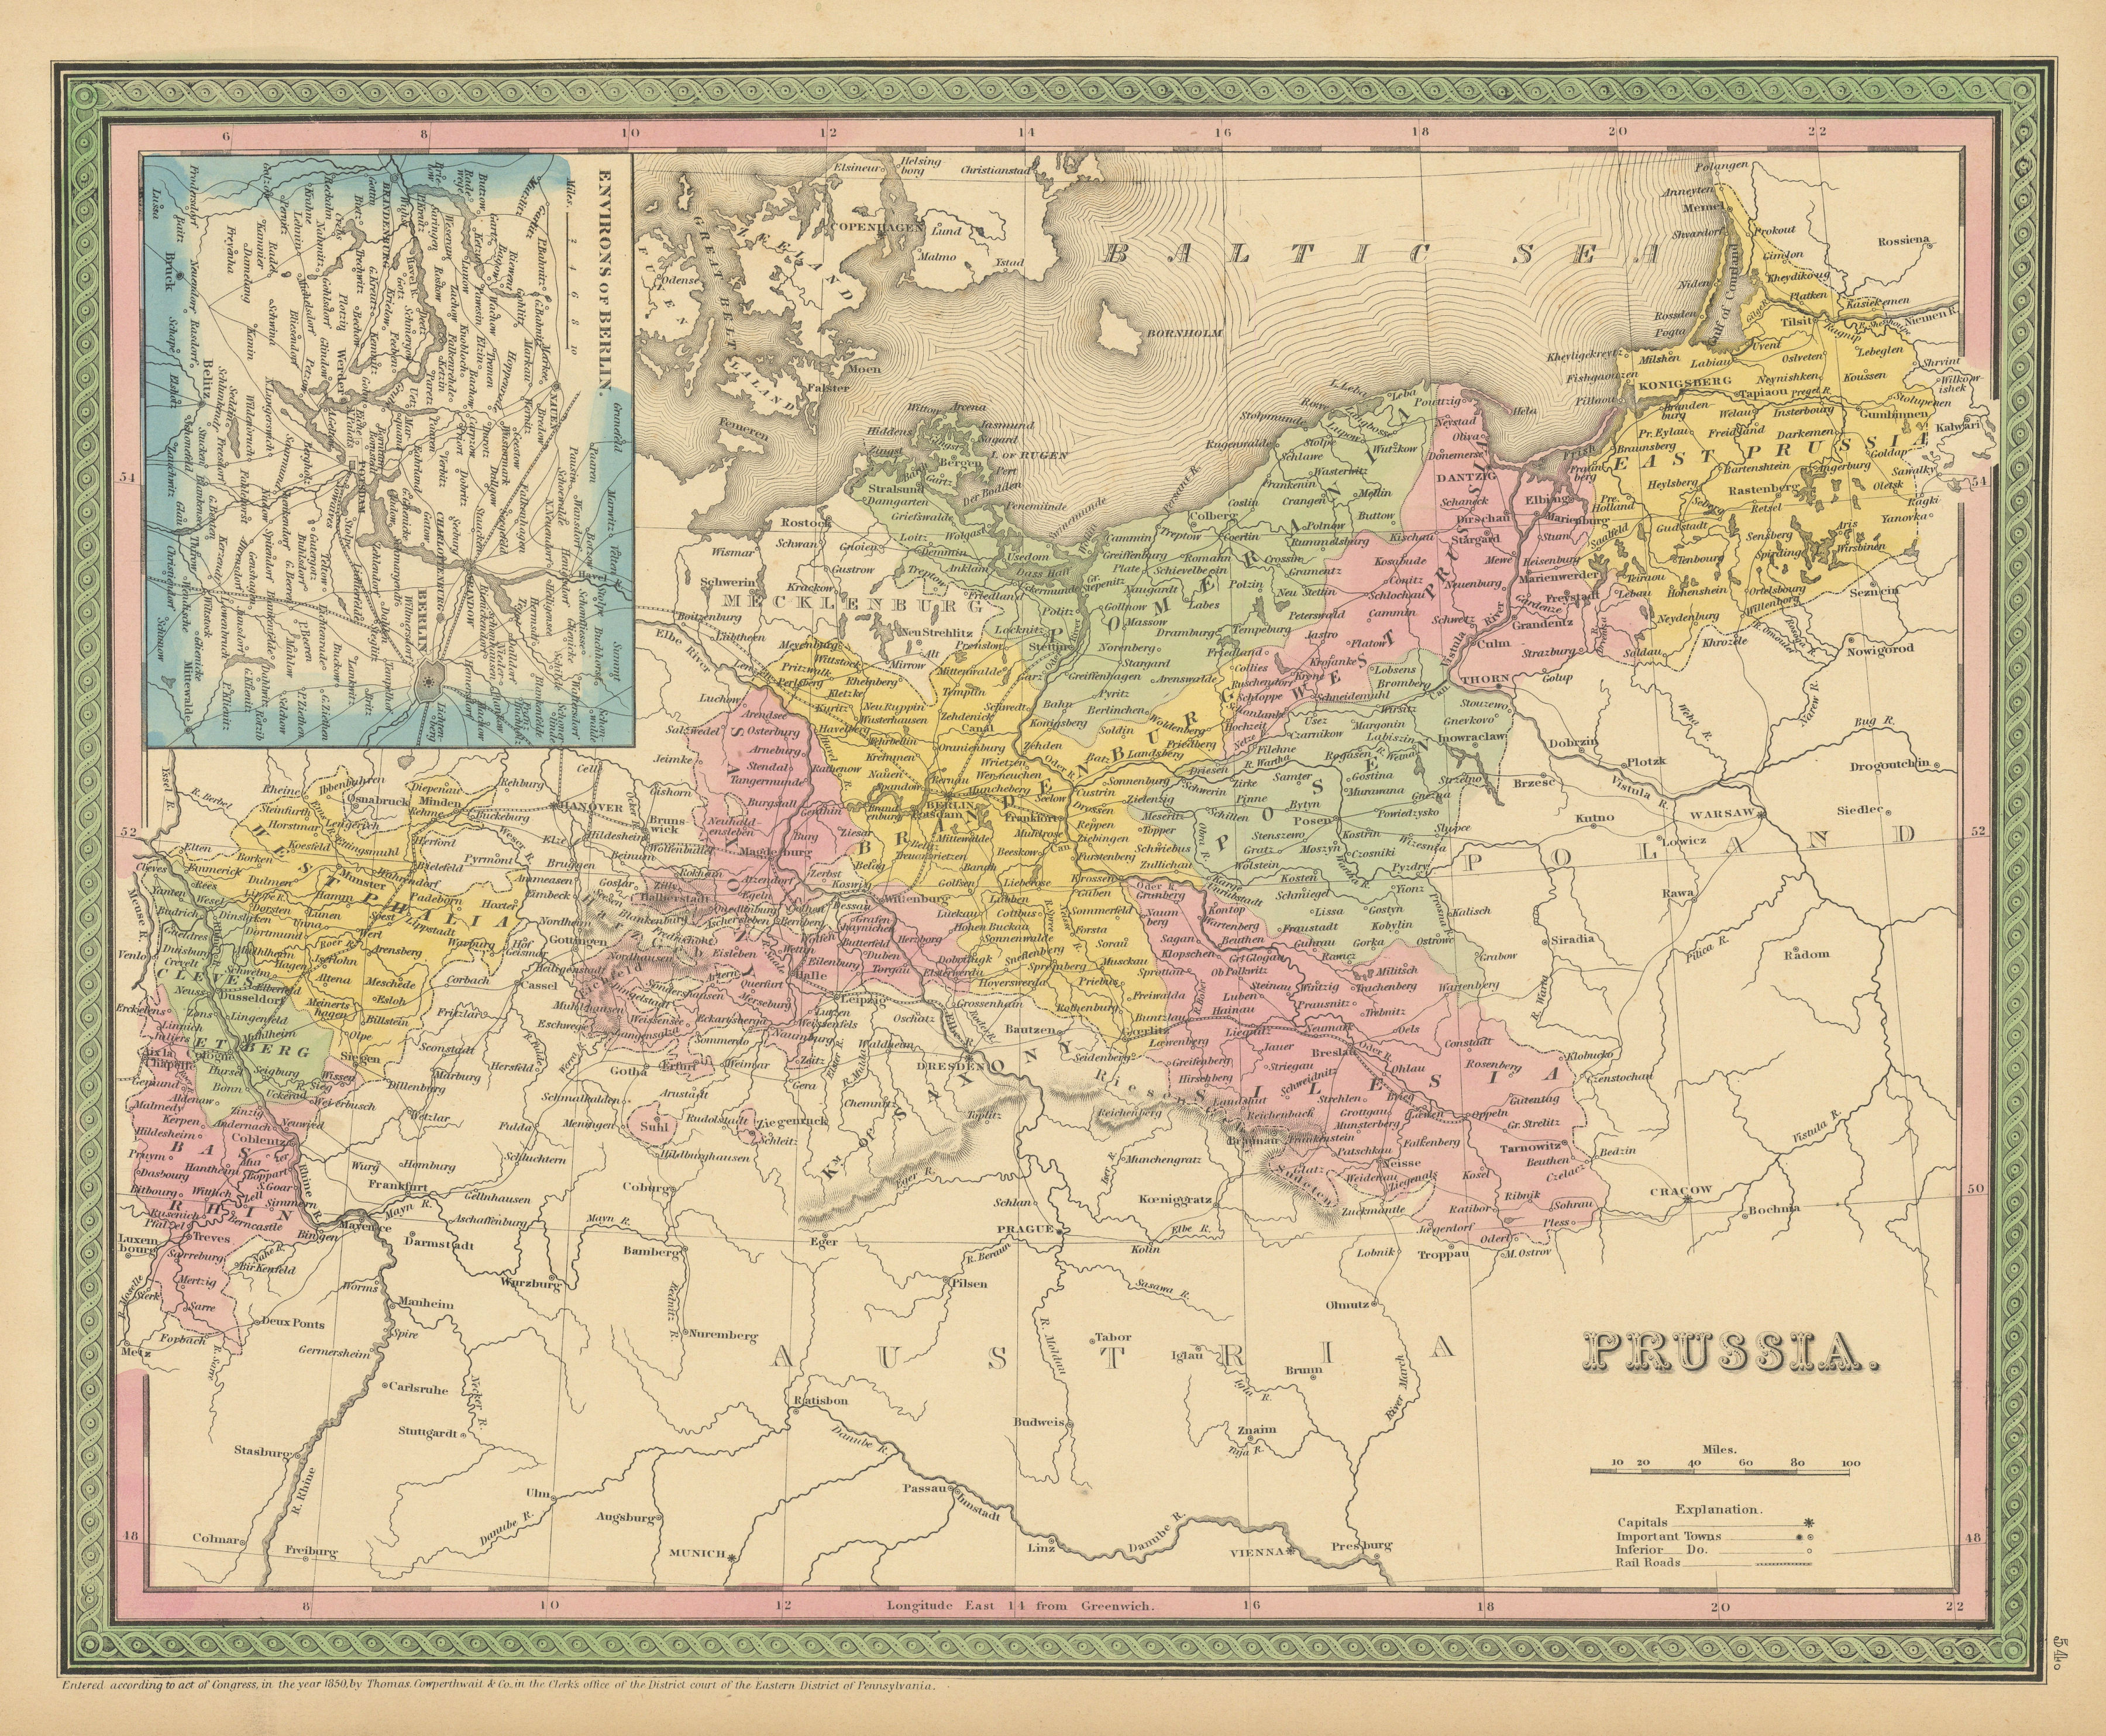 Associate Product Prussia. Berlin environs. Germany & Poland. THOMAS, COWPERTHWAIT 1852 old map